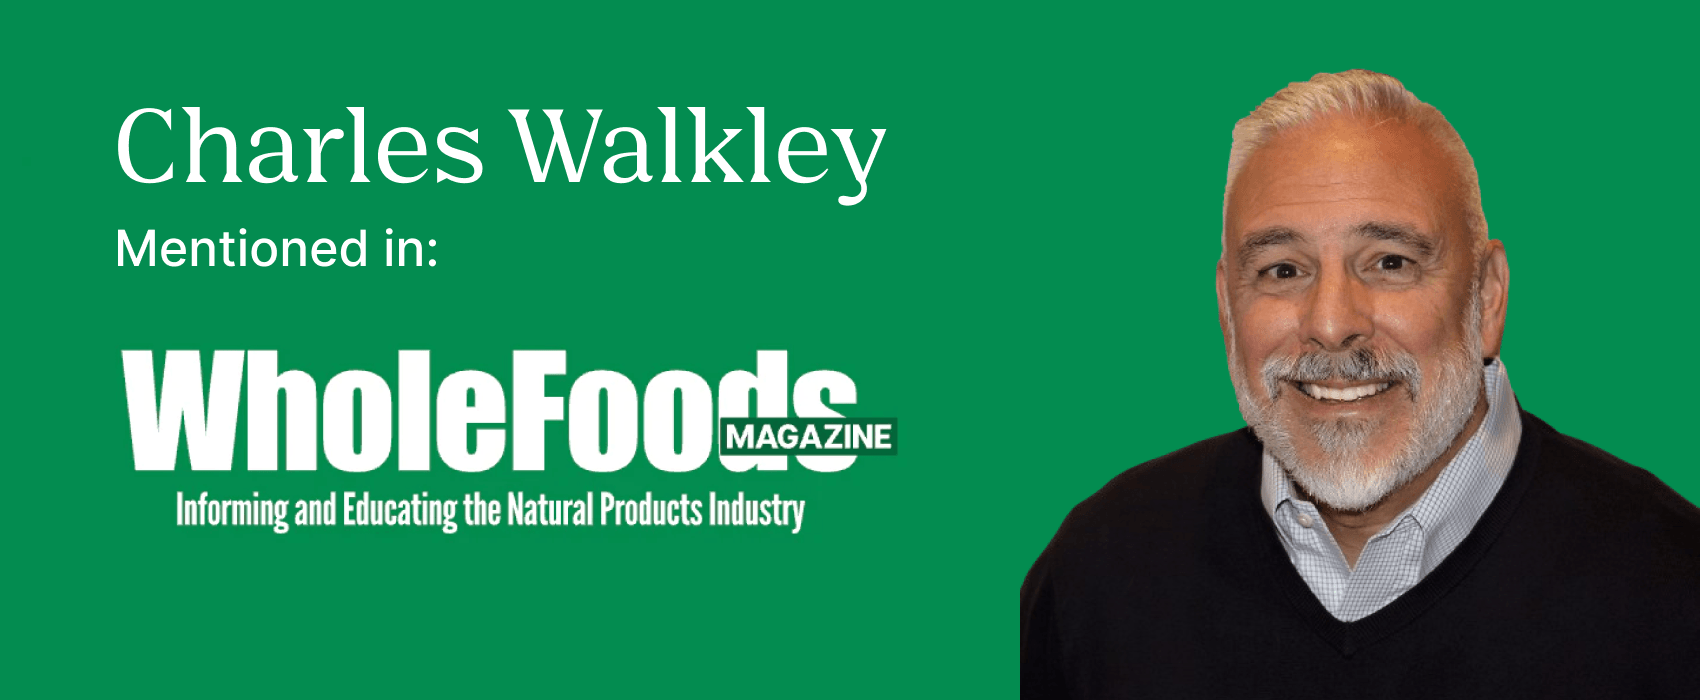 Whole Foods Mentions addition of Charles Walkley as Trace Minerals Chief Operating Officer - Trace Minerals